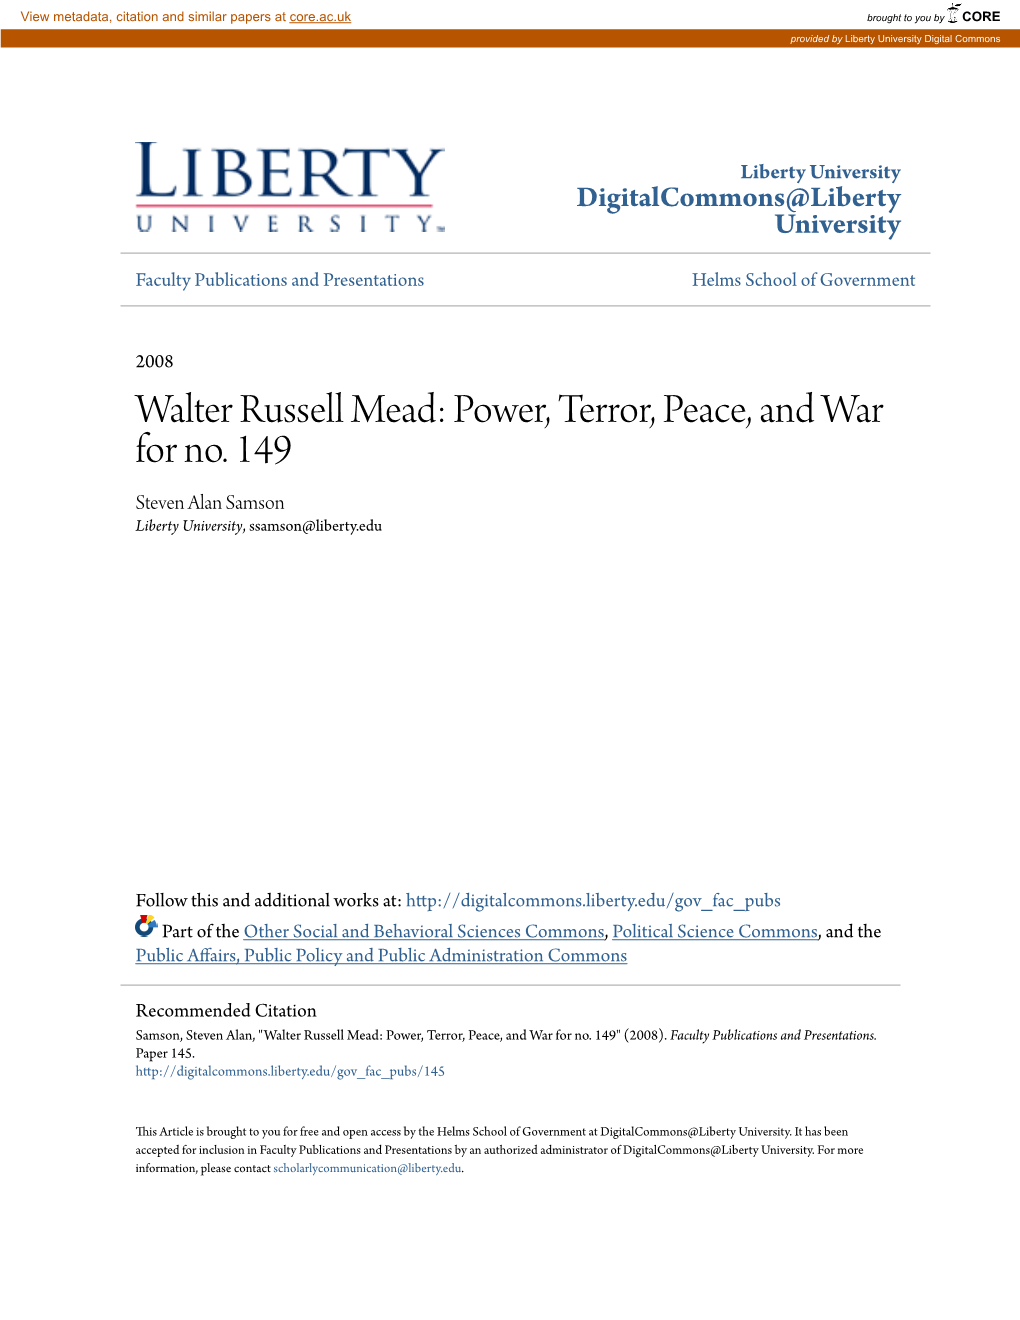 Walter Russell Mead: Power, Terror, Peace, and War for No